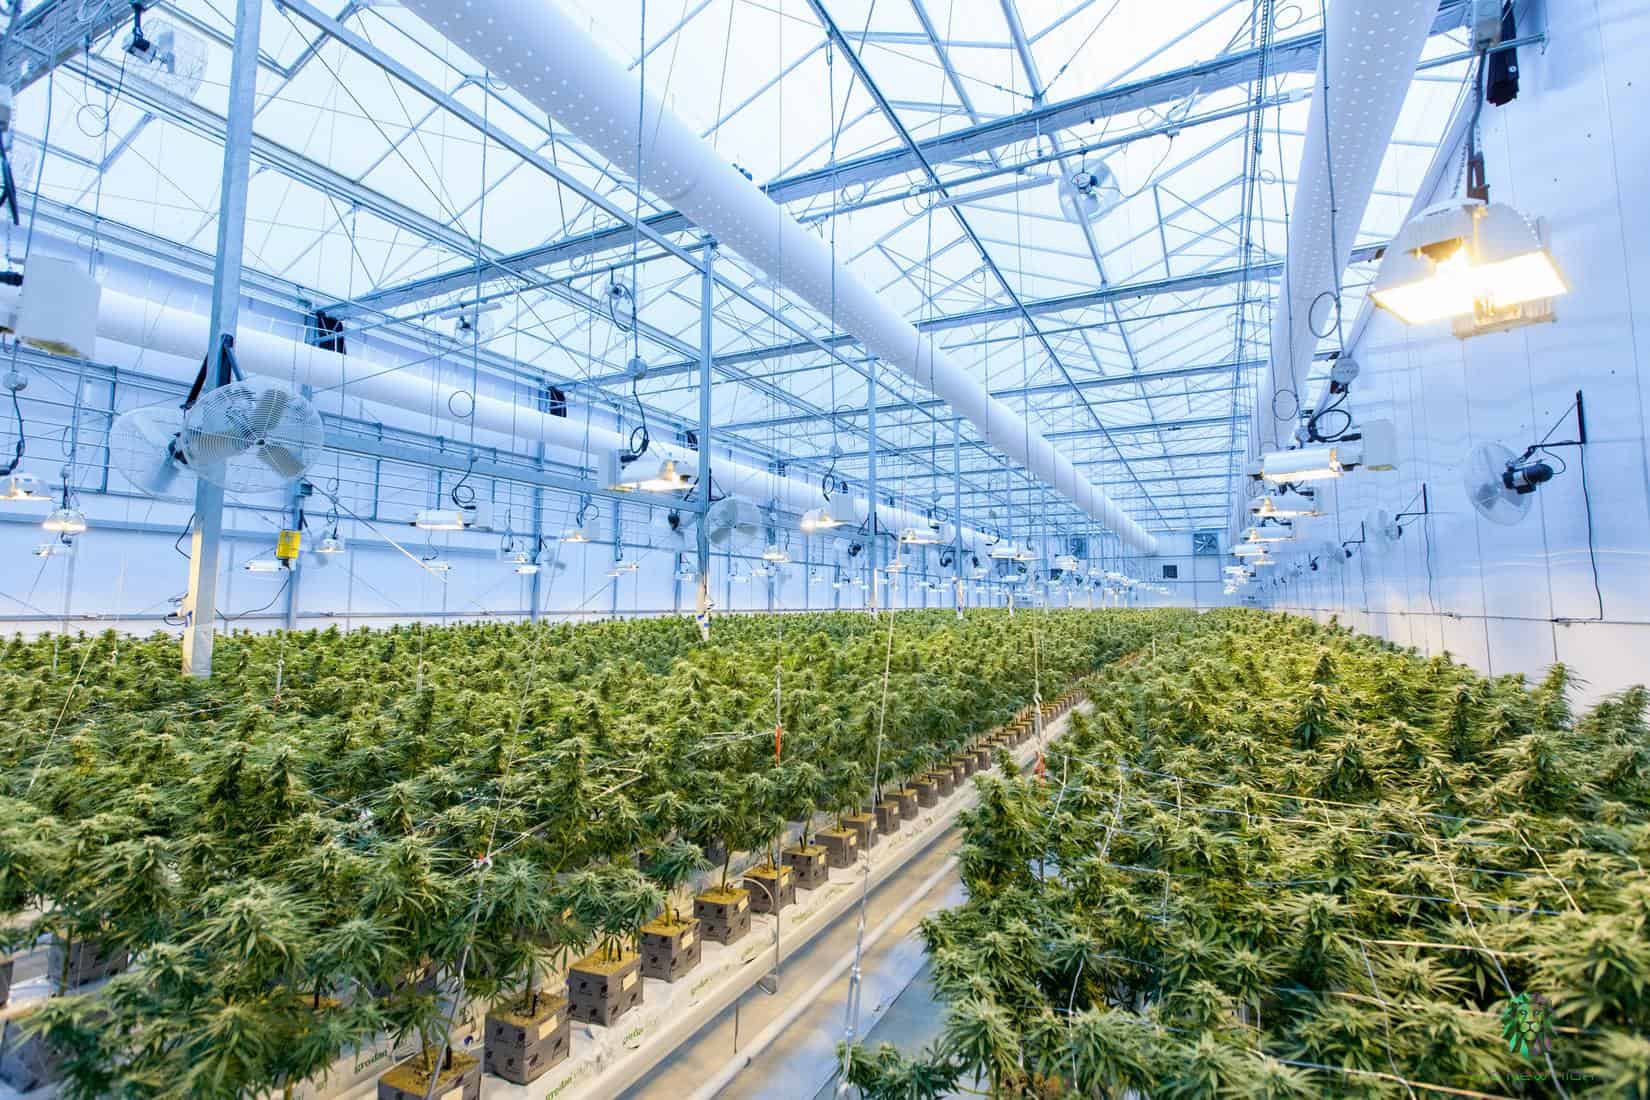 Should You Buy Aphria Stock?